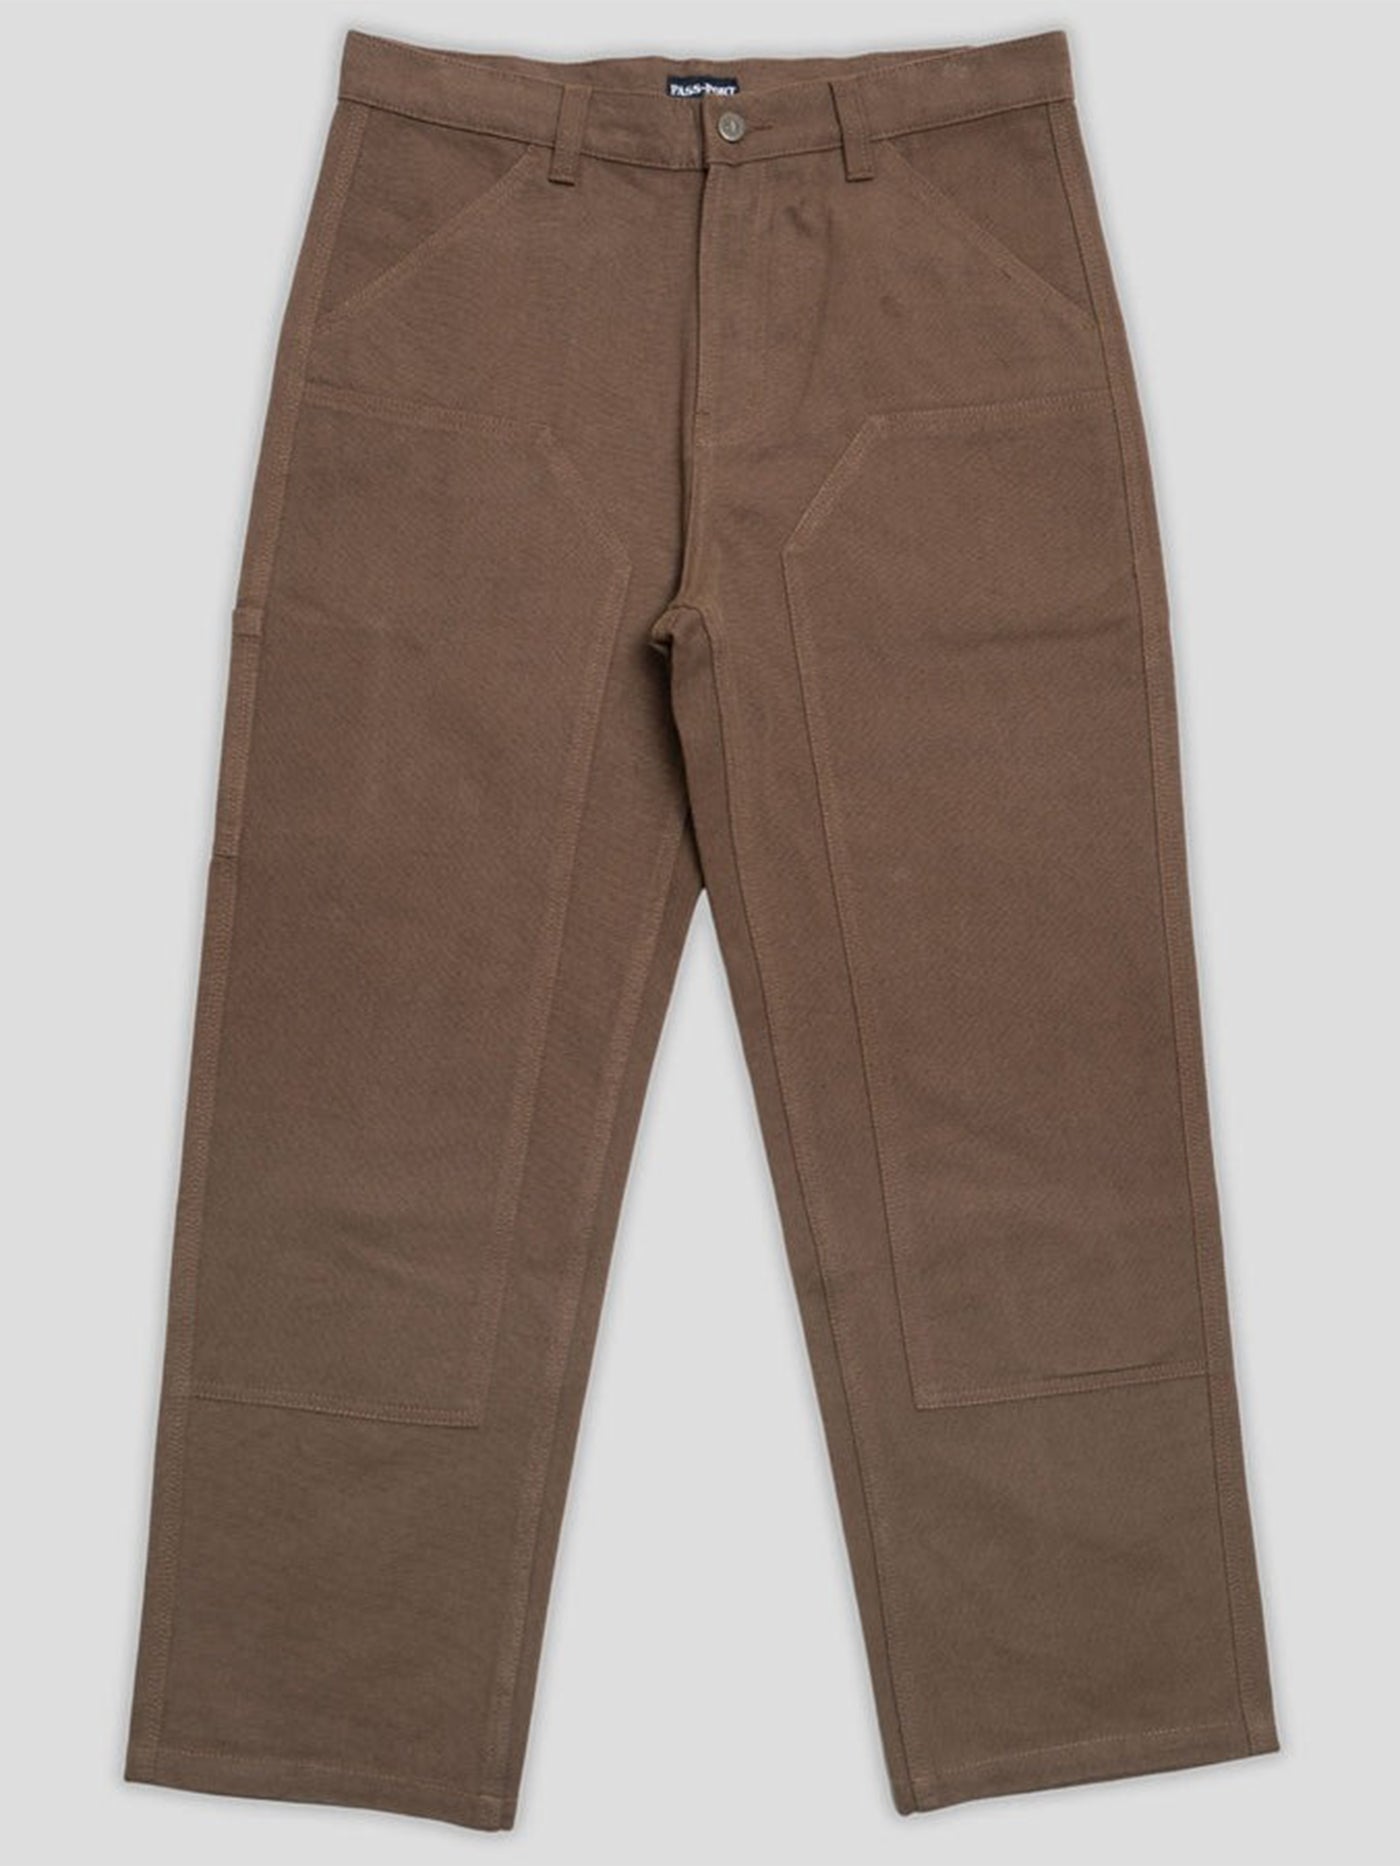 Pass Port Double Knee Diggers Club Pants Spring 2024